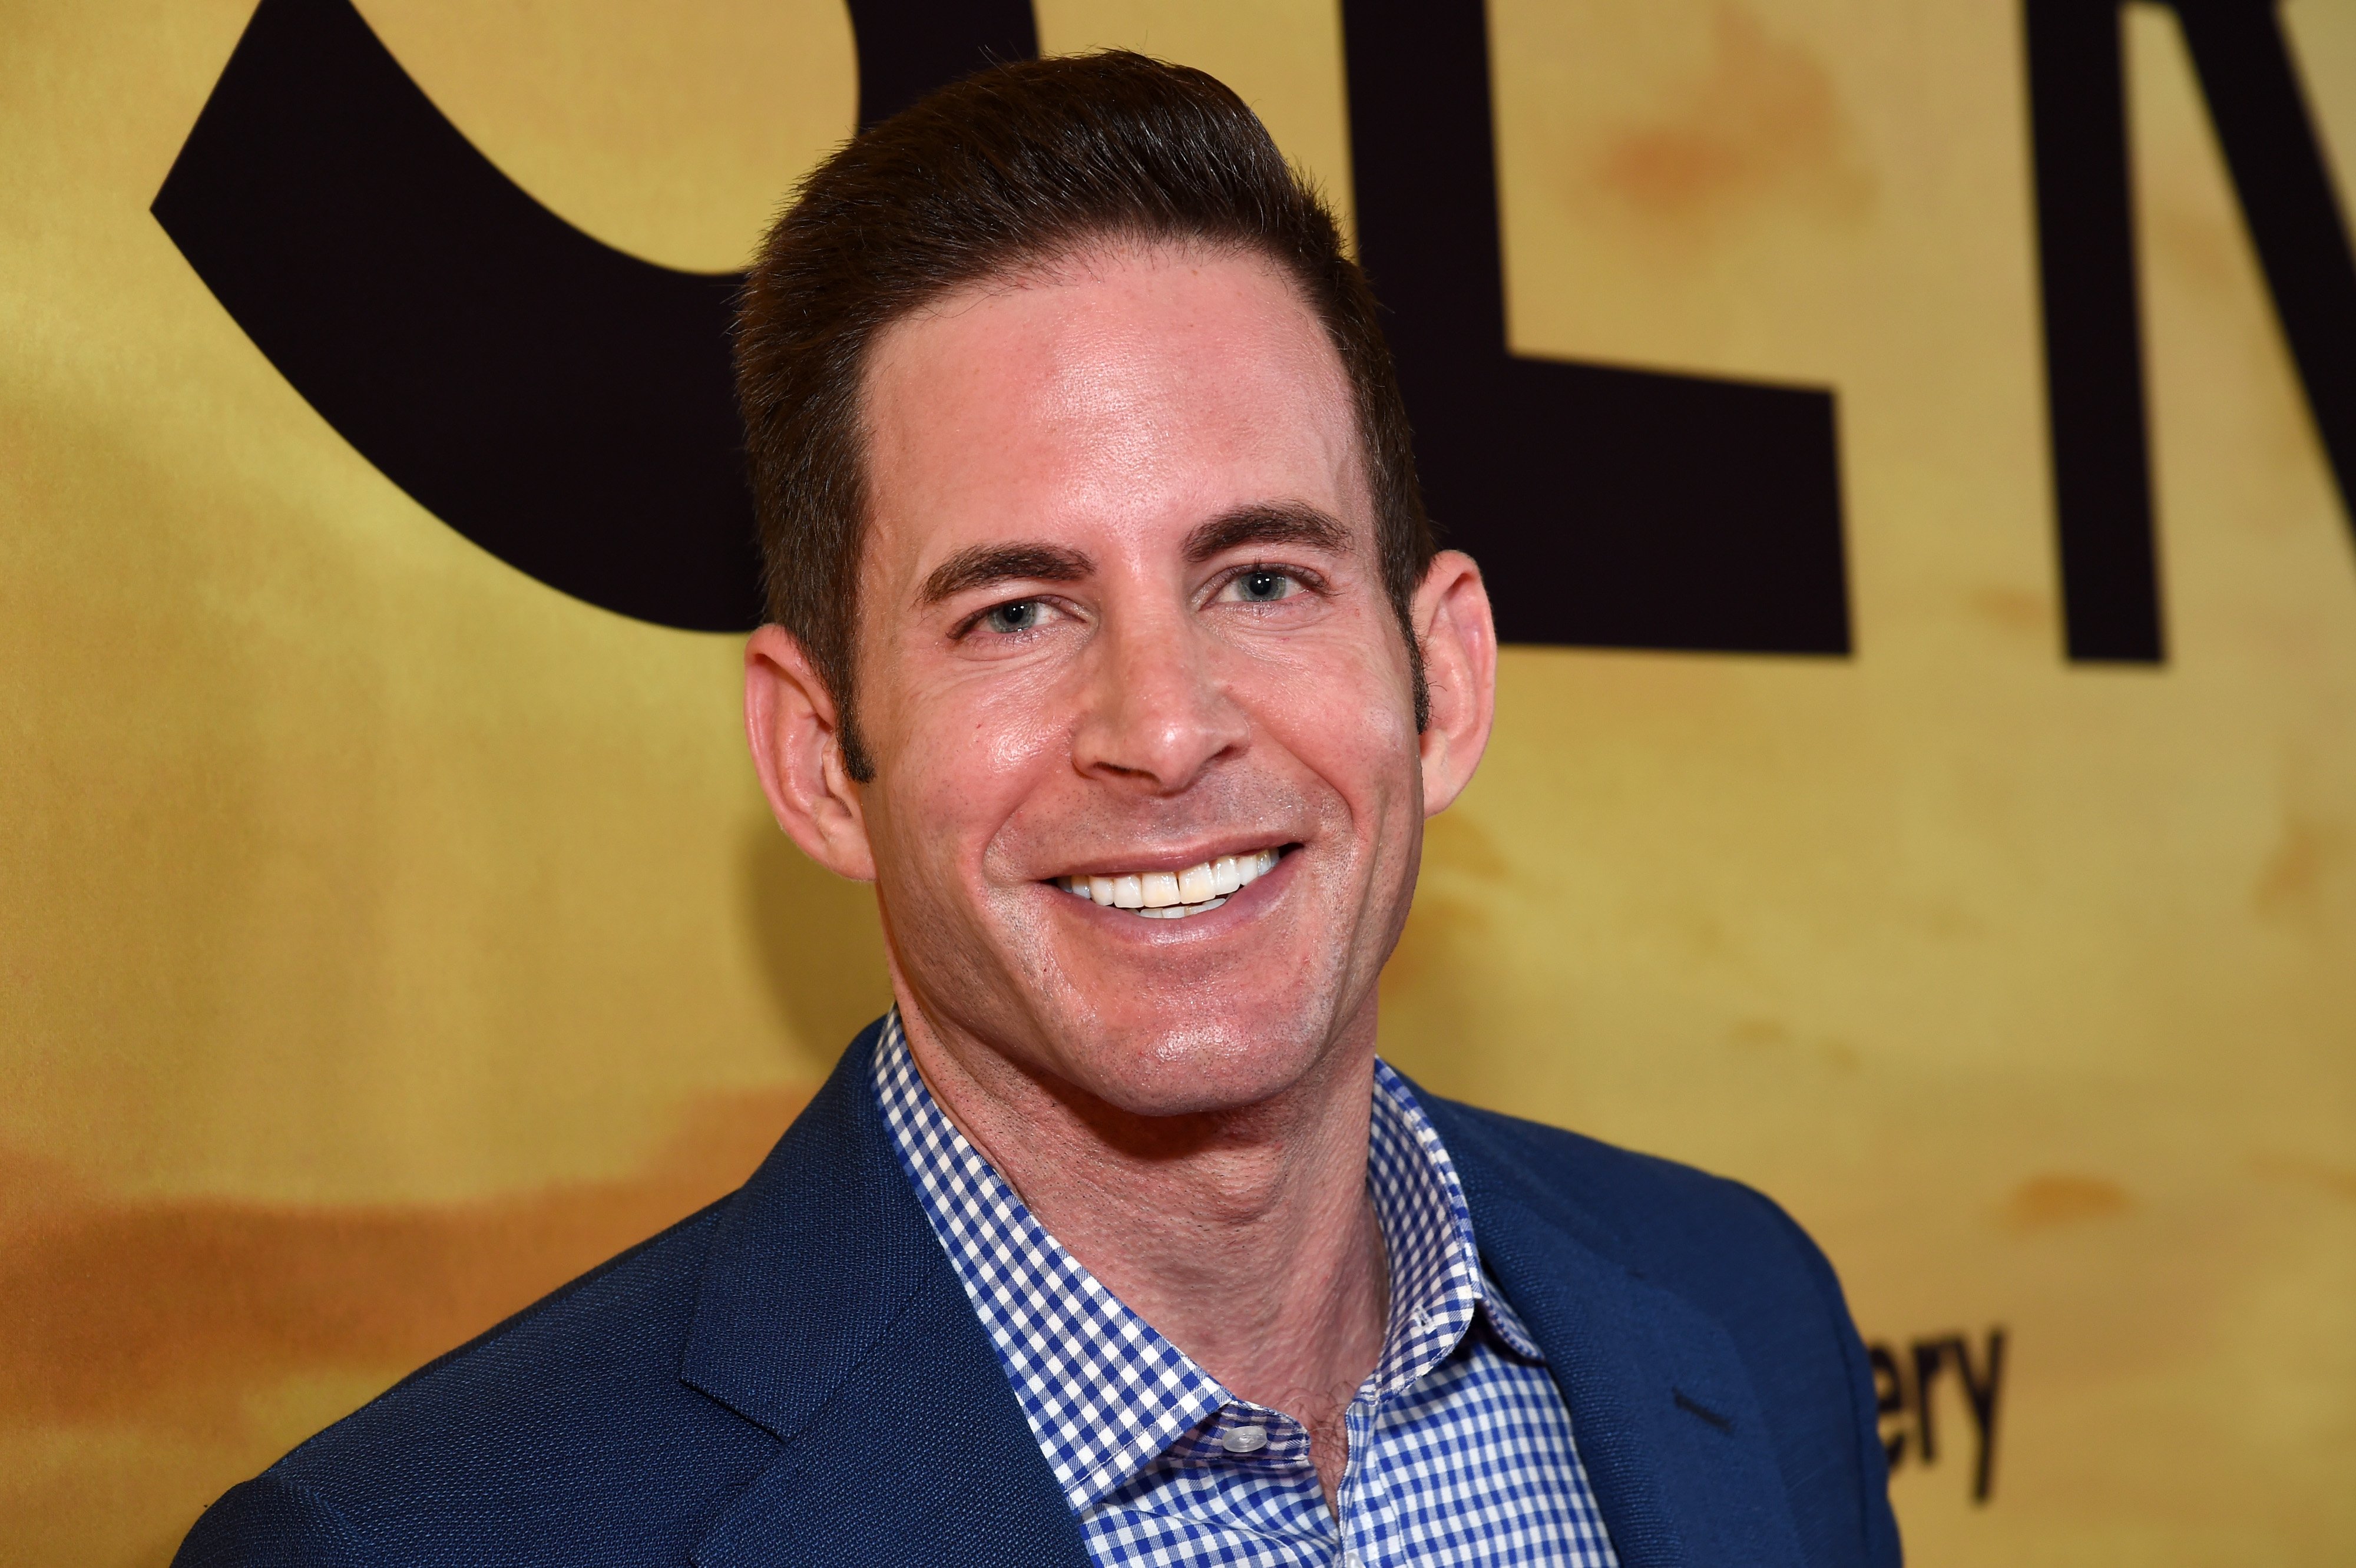 "Flip or Flop" TV host Tarek El Moussa gushed on how fiance Heather Rae Young made him feel special during his 39th birthday celebration in Laguna Beach last weekend. | Photo: Getty Images